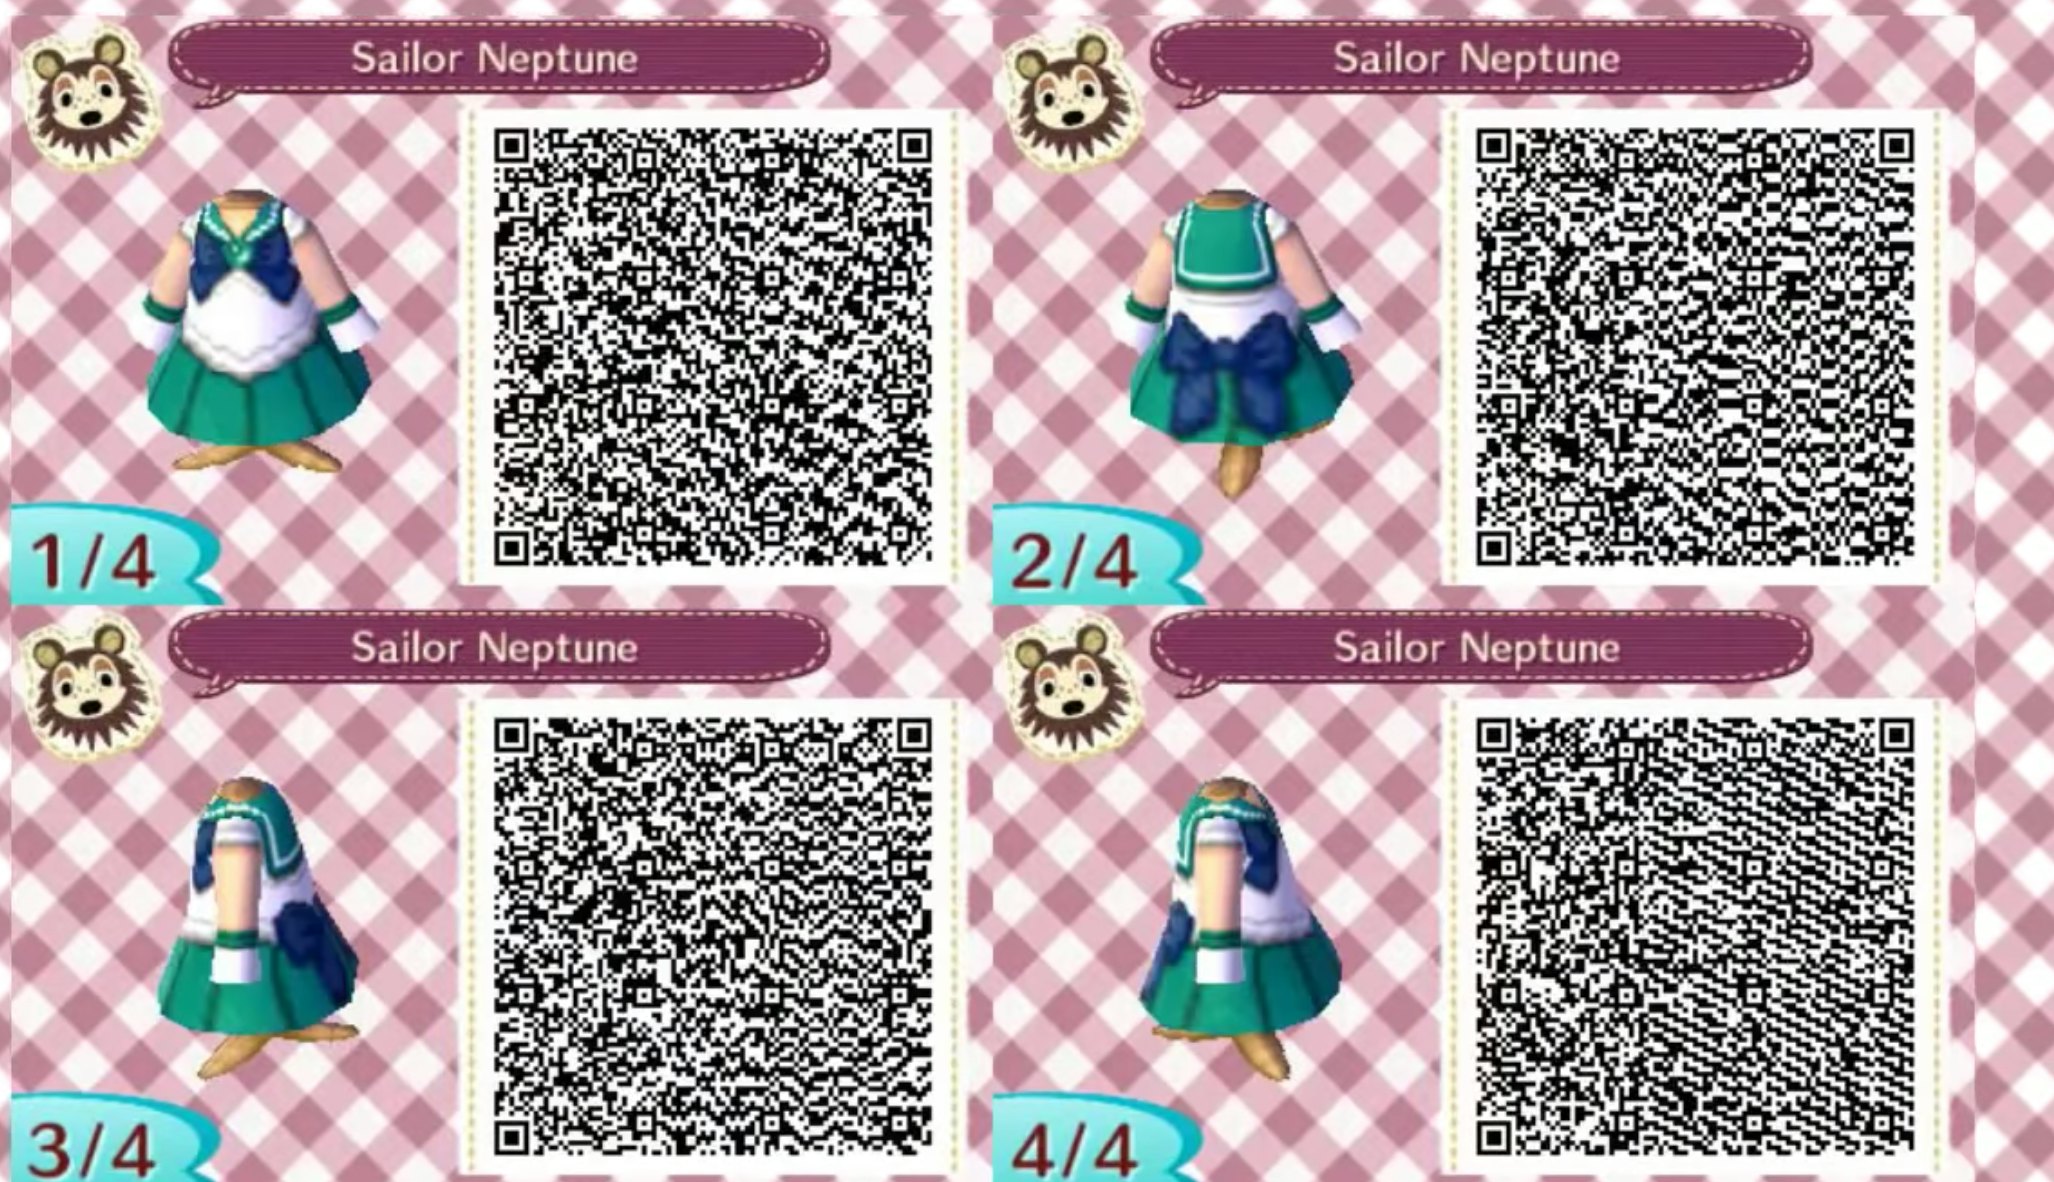 Animal Crossing New Horizons Designs 10 Qr Codes For Sailor Moon Outfits - roblox clothes codes included sparkle